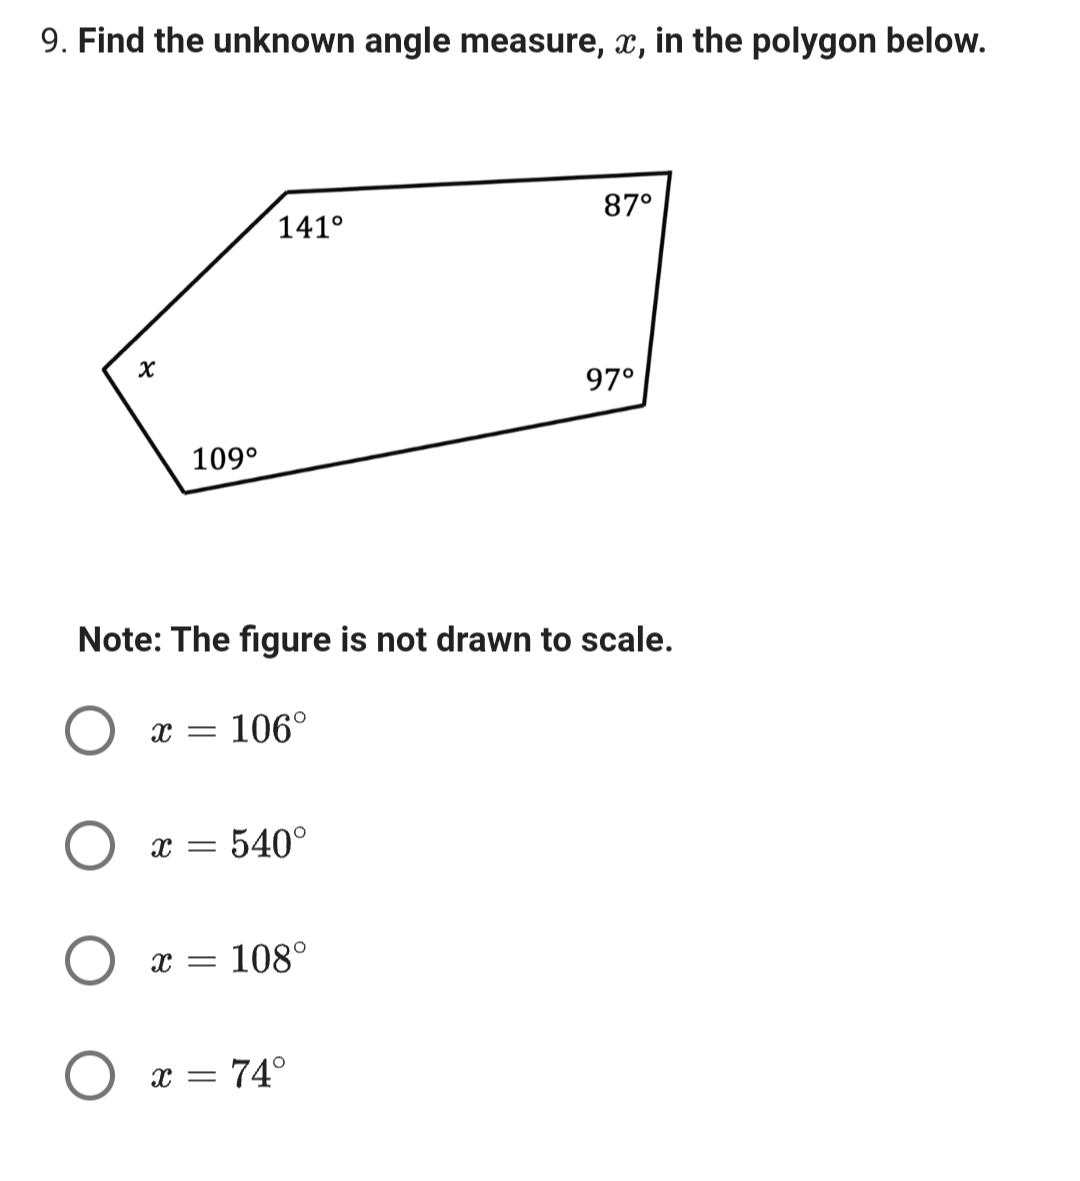 9. Find the unknown angle measure, x, in the polygon below.
x
109⁰
X =
141⁰
Note: The figure is not drawn to scale.
106°
Xx= 540°
X =
x = 108°
87⁰
= 74°
97°